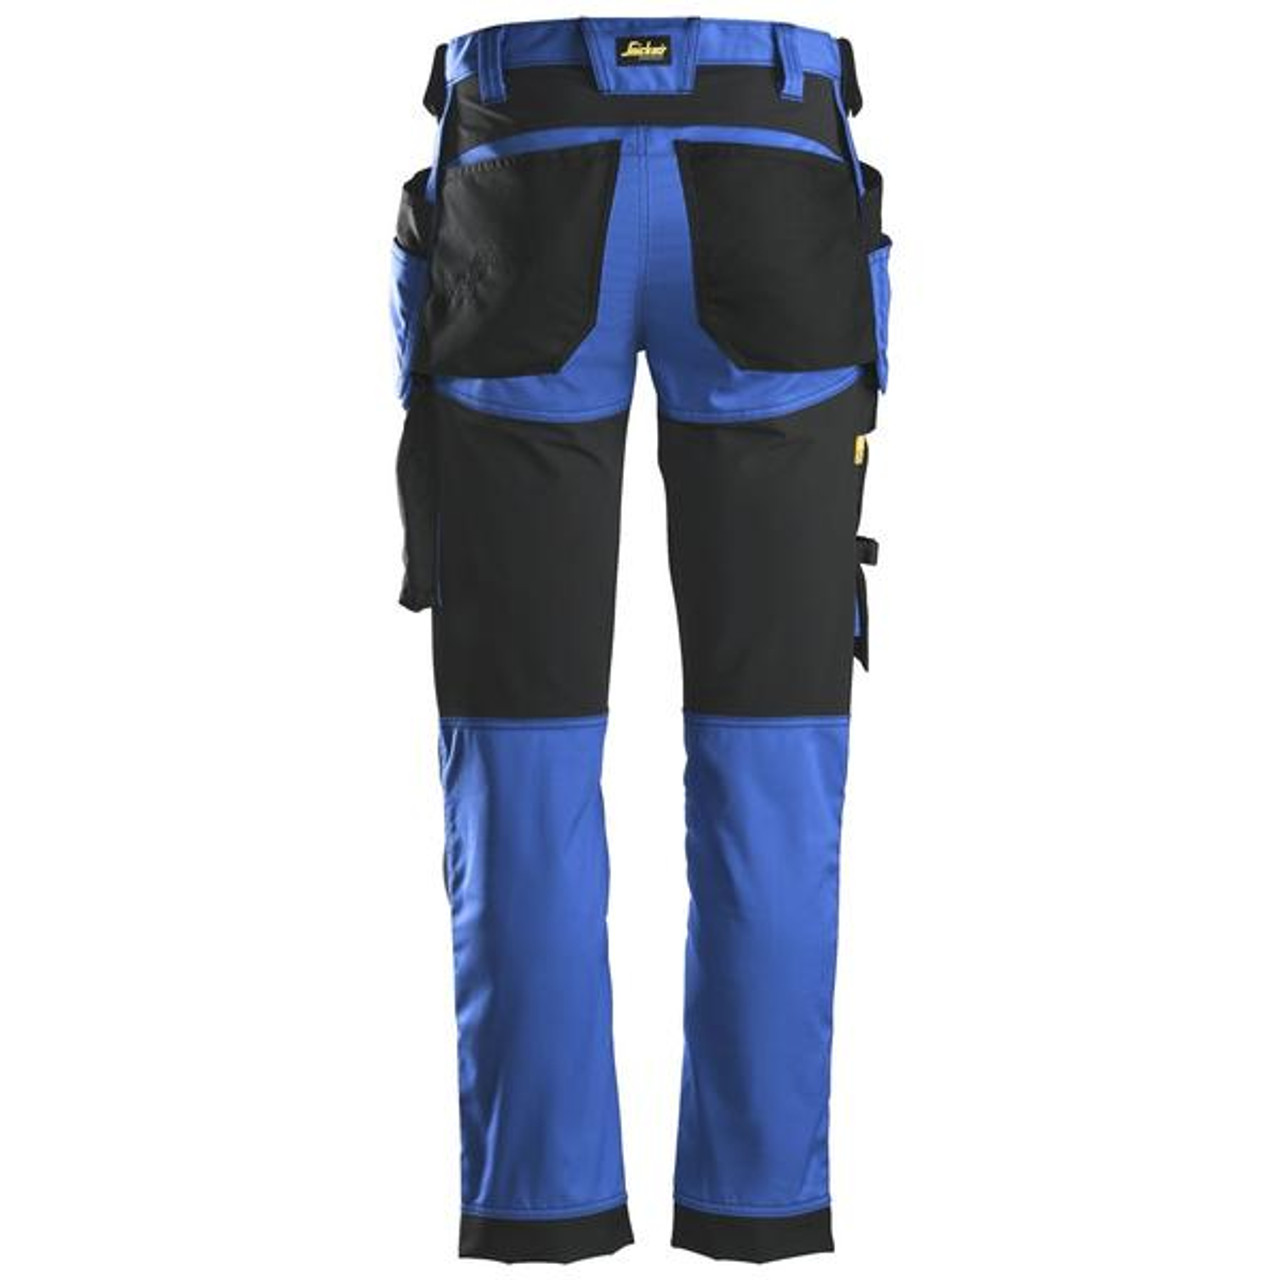 Suitable work Trousers available in Australia and New Zealand SNICKERS Cotton with Stretch Blue Trousers for Plumber